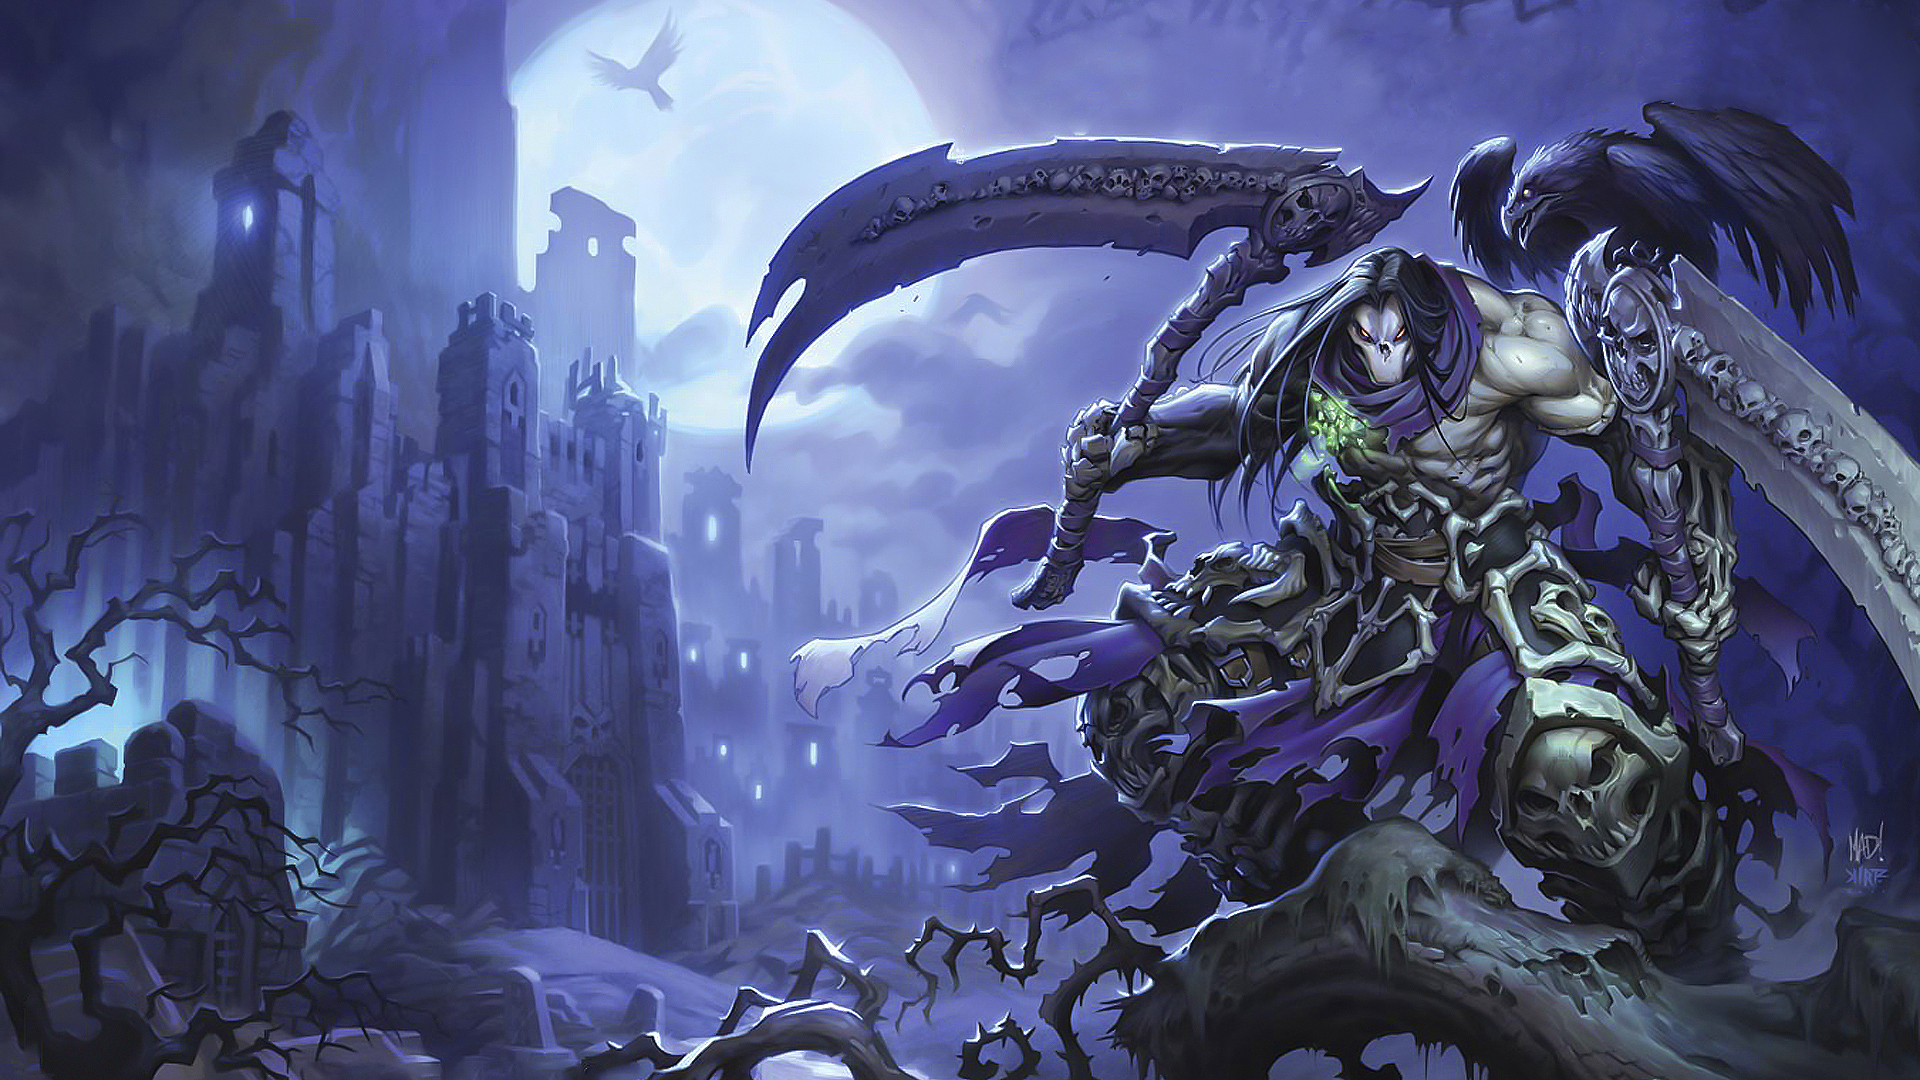 51 Darksiders II HD Wallpapers | Backgrounds - Wallpaper Abyss